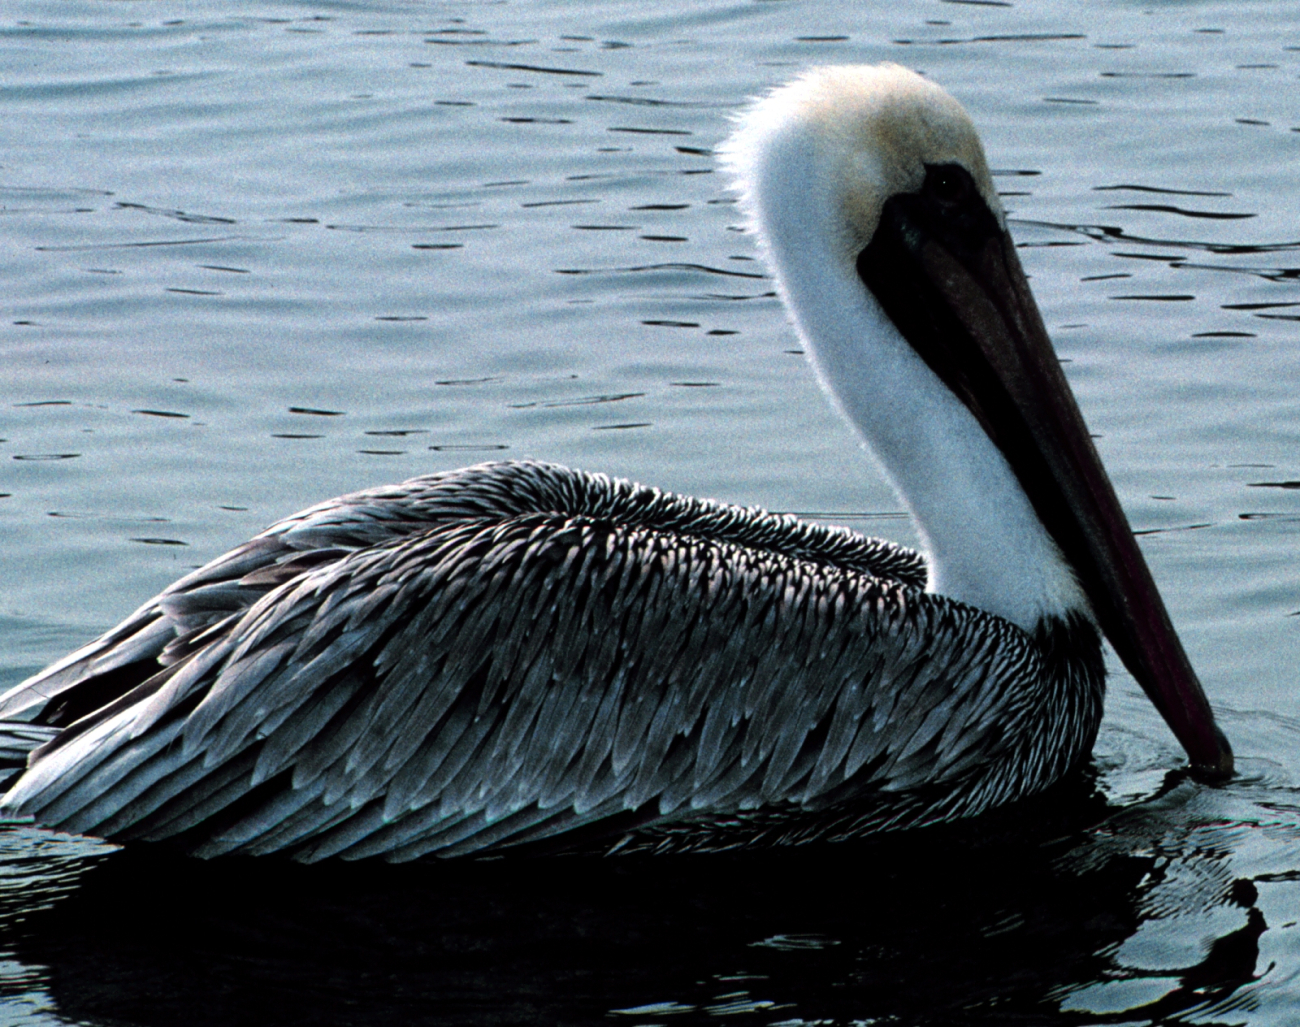 A single Brown Pelican rests on the water in Tampa Bay